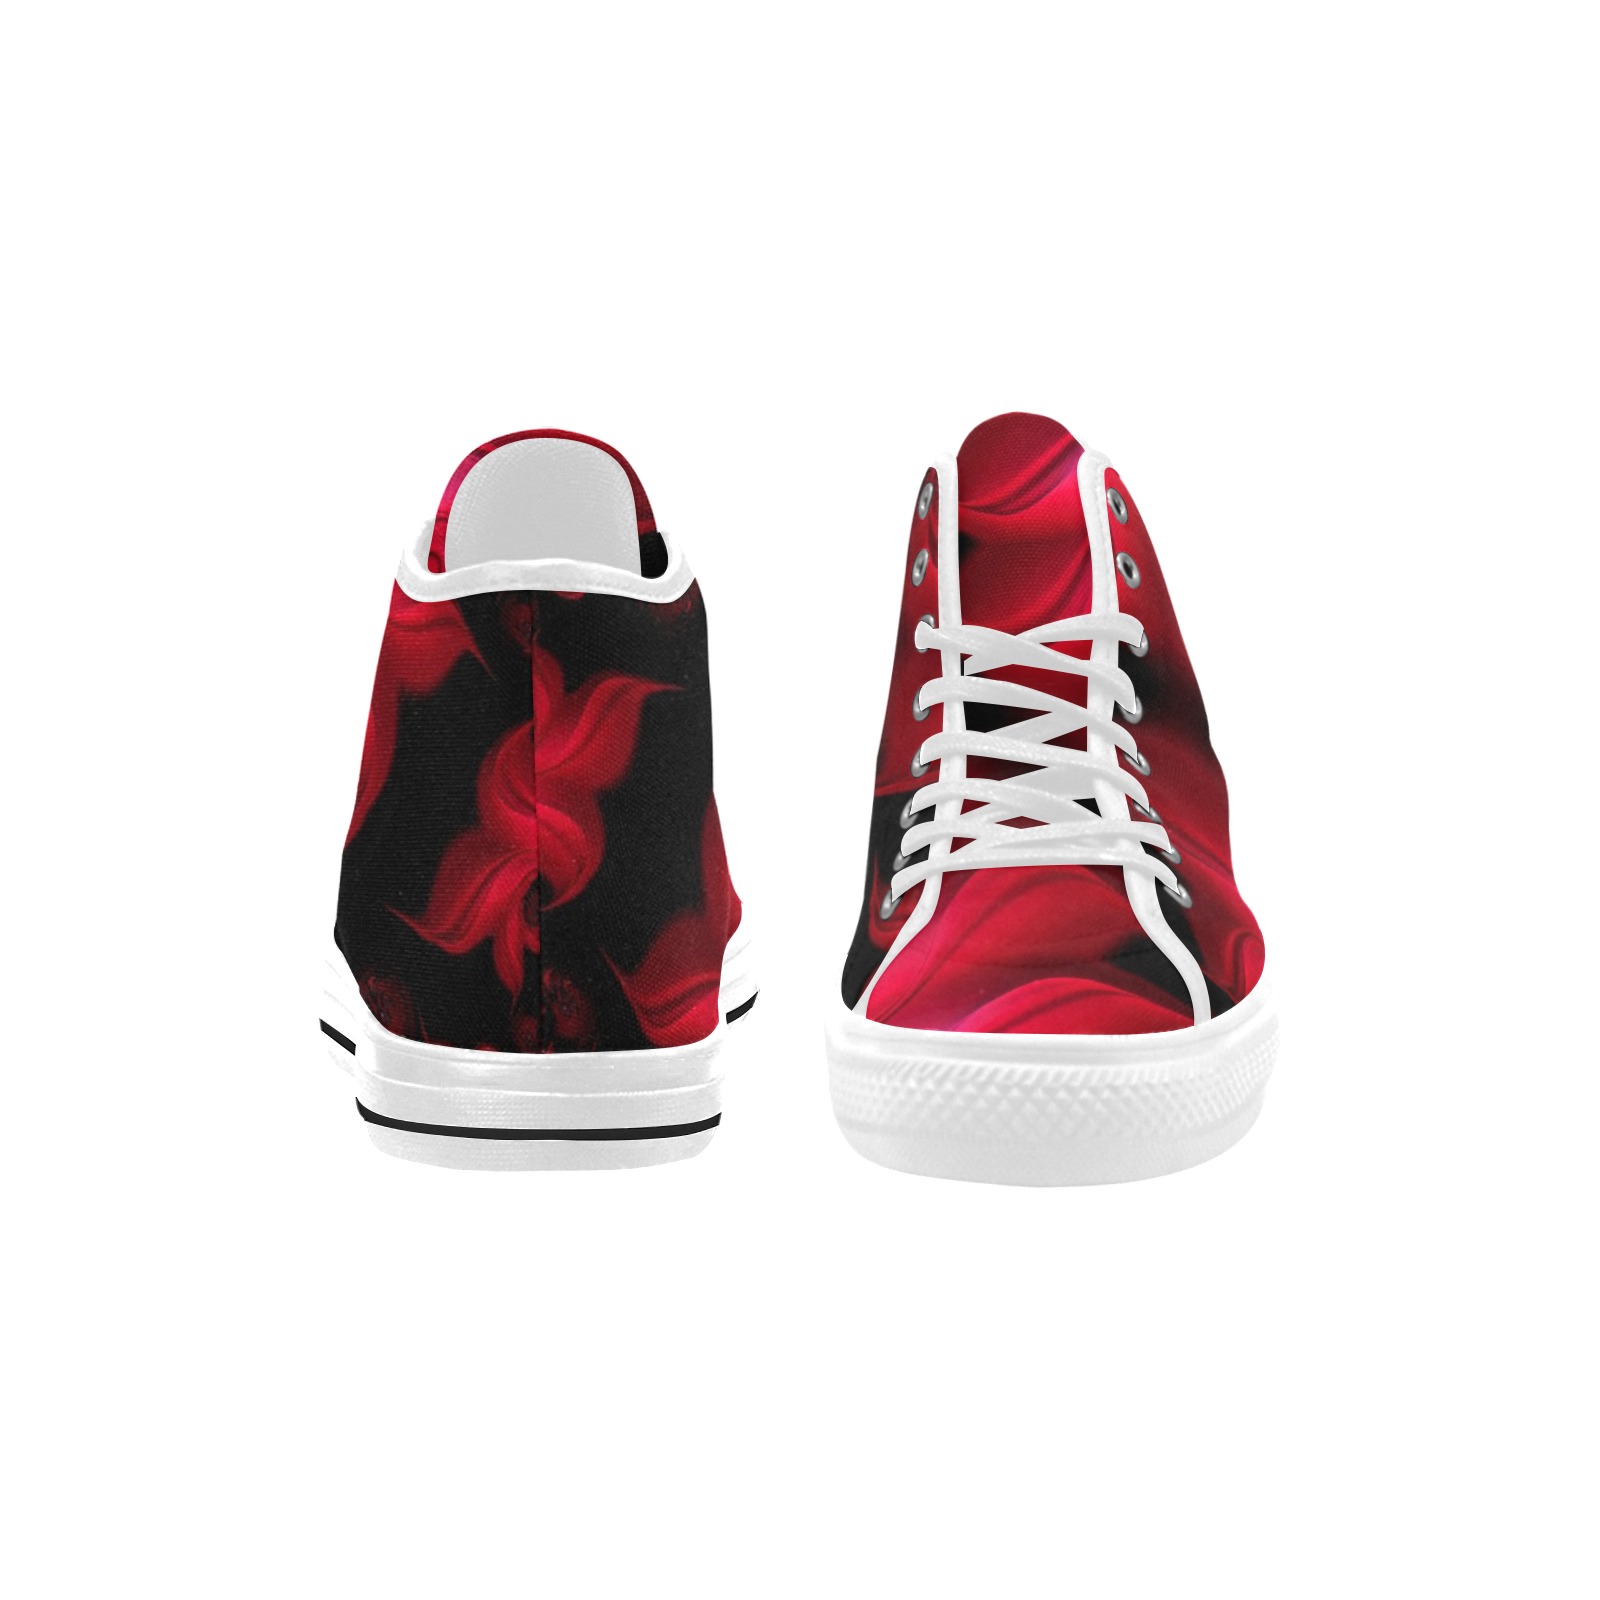 Black and Red Fiery Whirlpools Fractal Abstract Vancouver H Women's Canvas Shoes (1013-1)